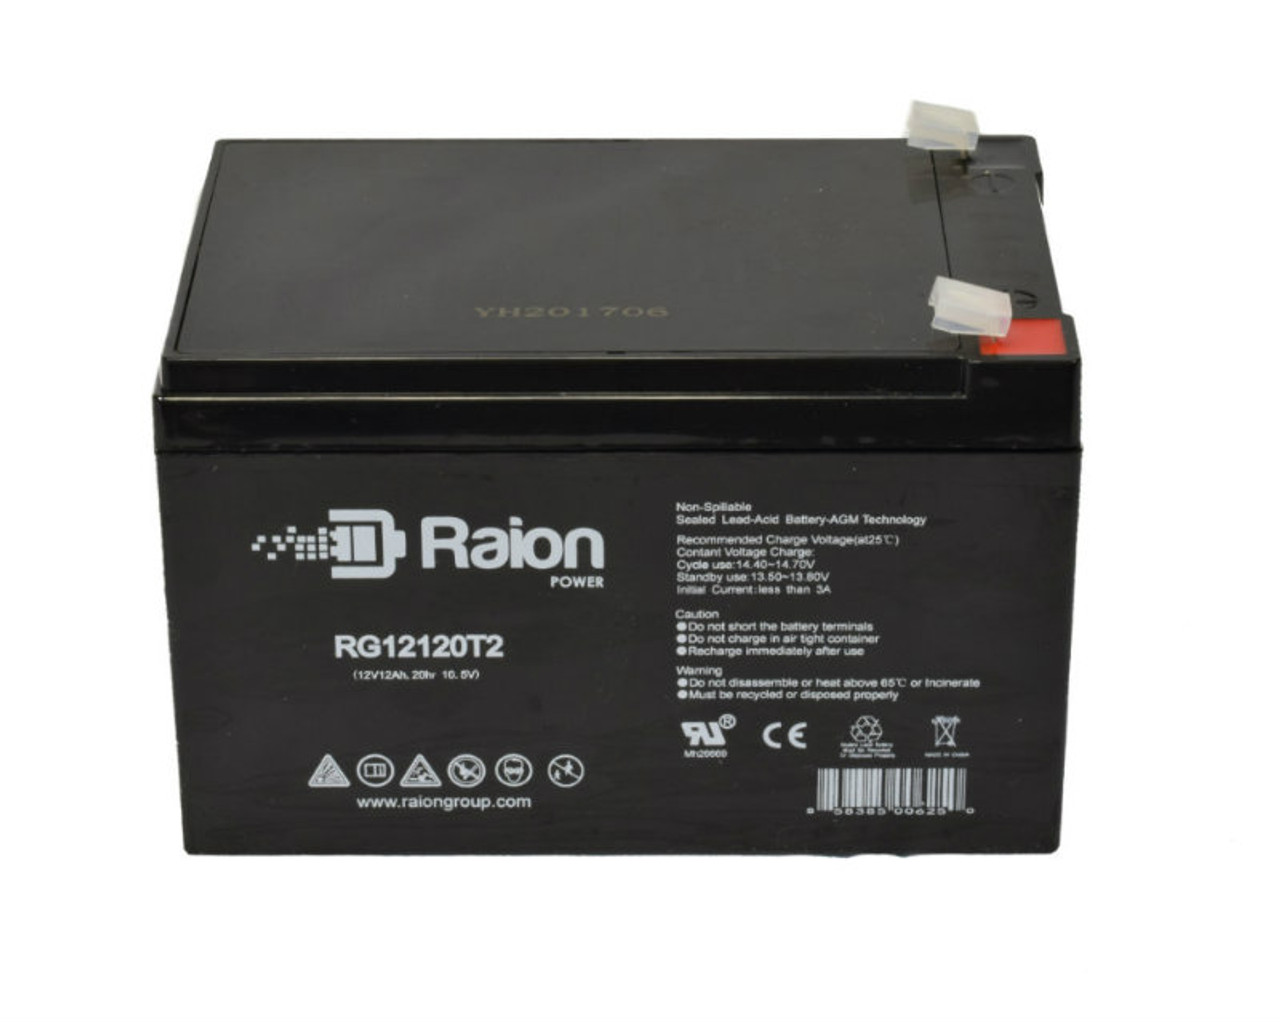 Raion Power RG12120T2 SLA Battery for Invacare Zoom 220 Wheelchairs